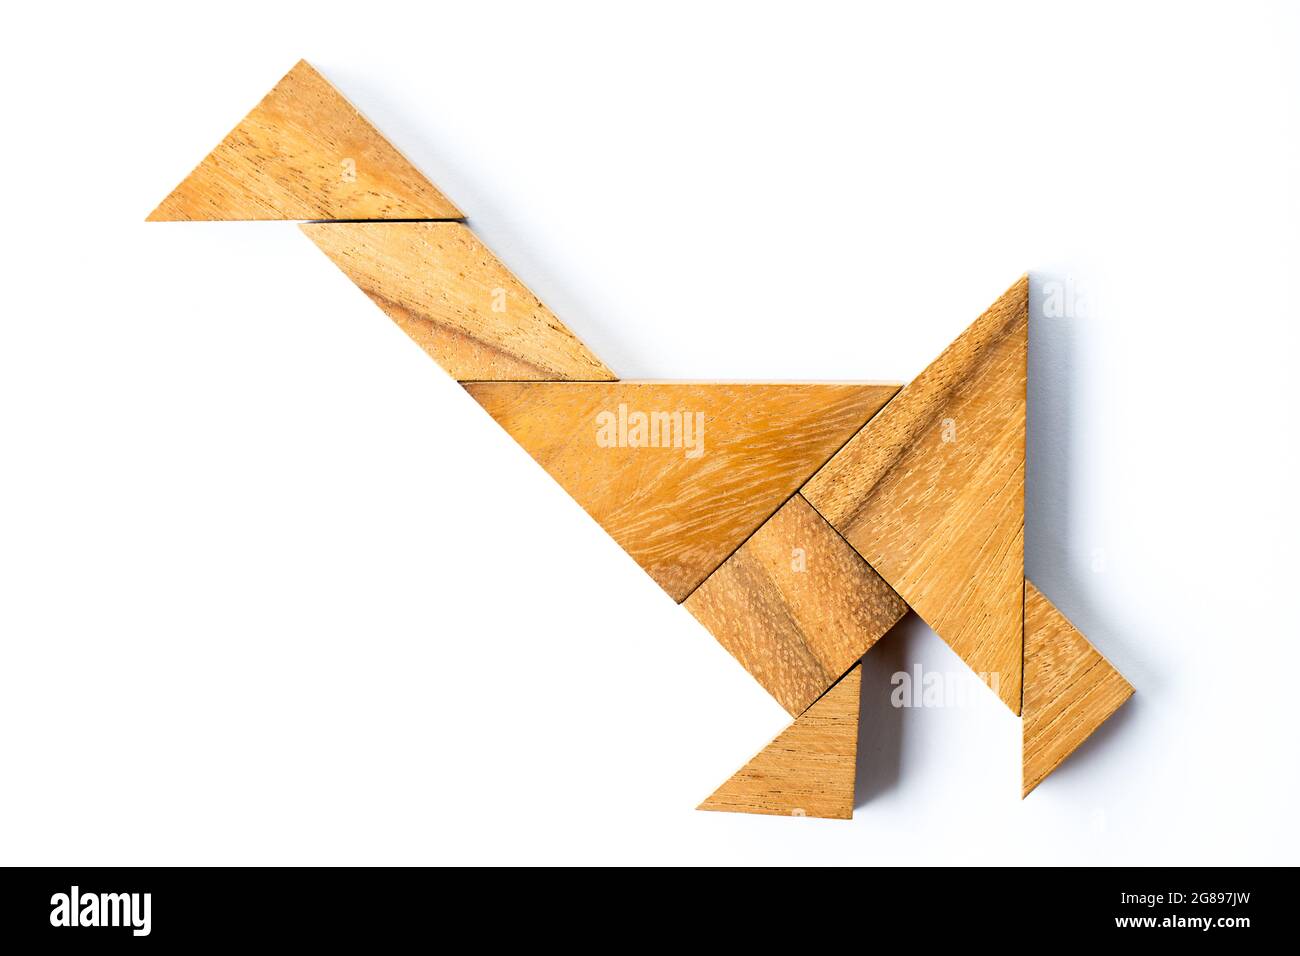 Wood tangram puzzle in walking swan or duck shape on white background Stock  Photo - Alamy